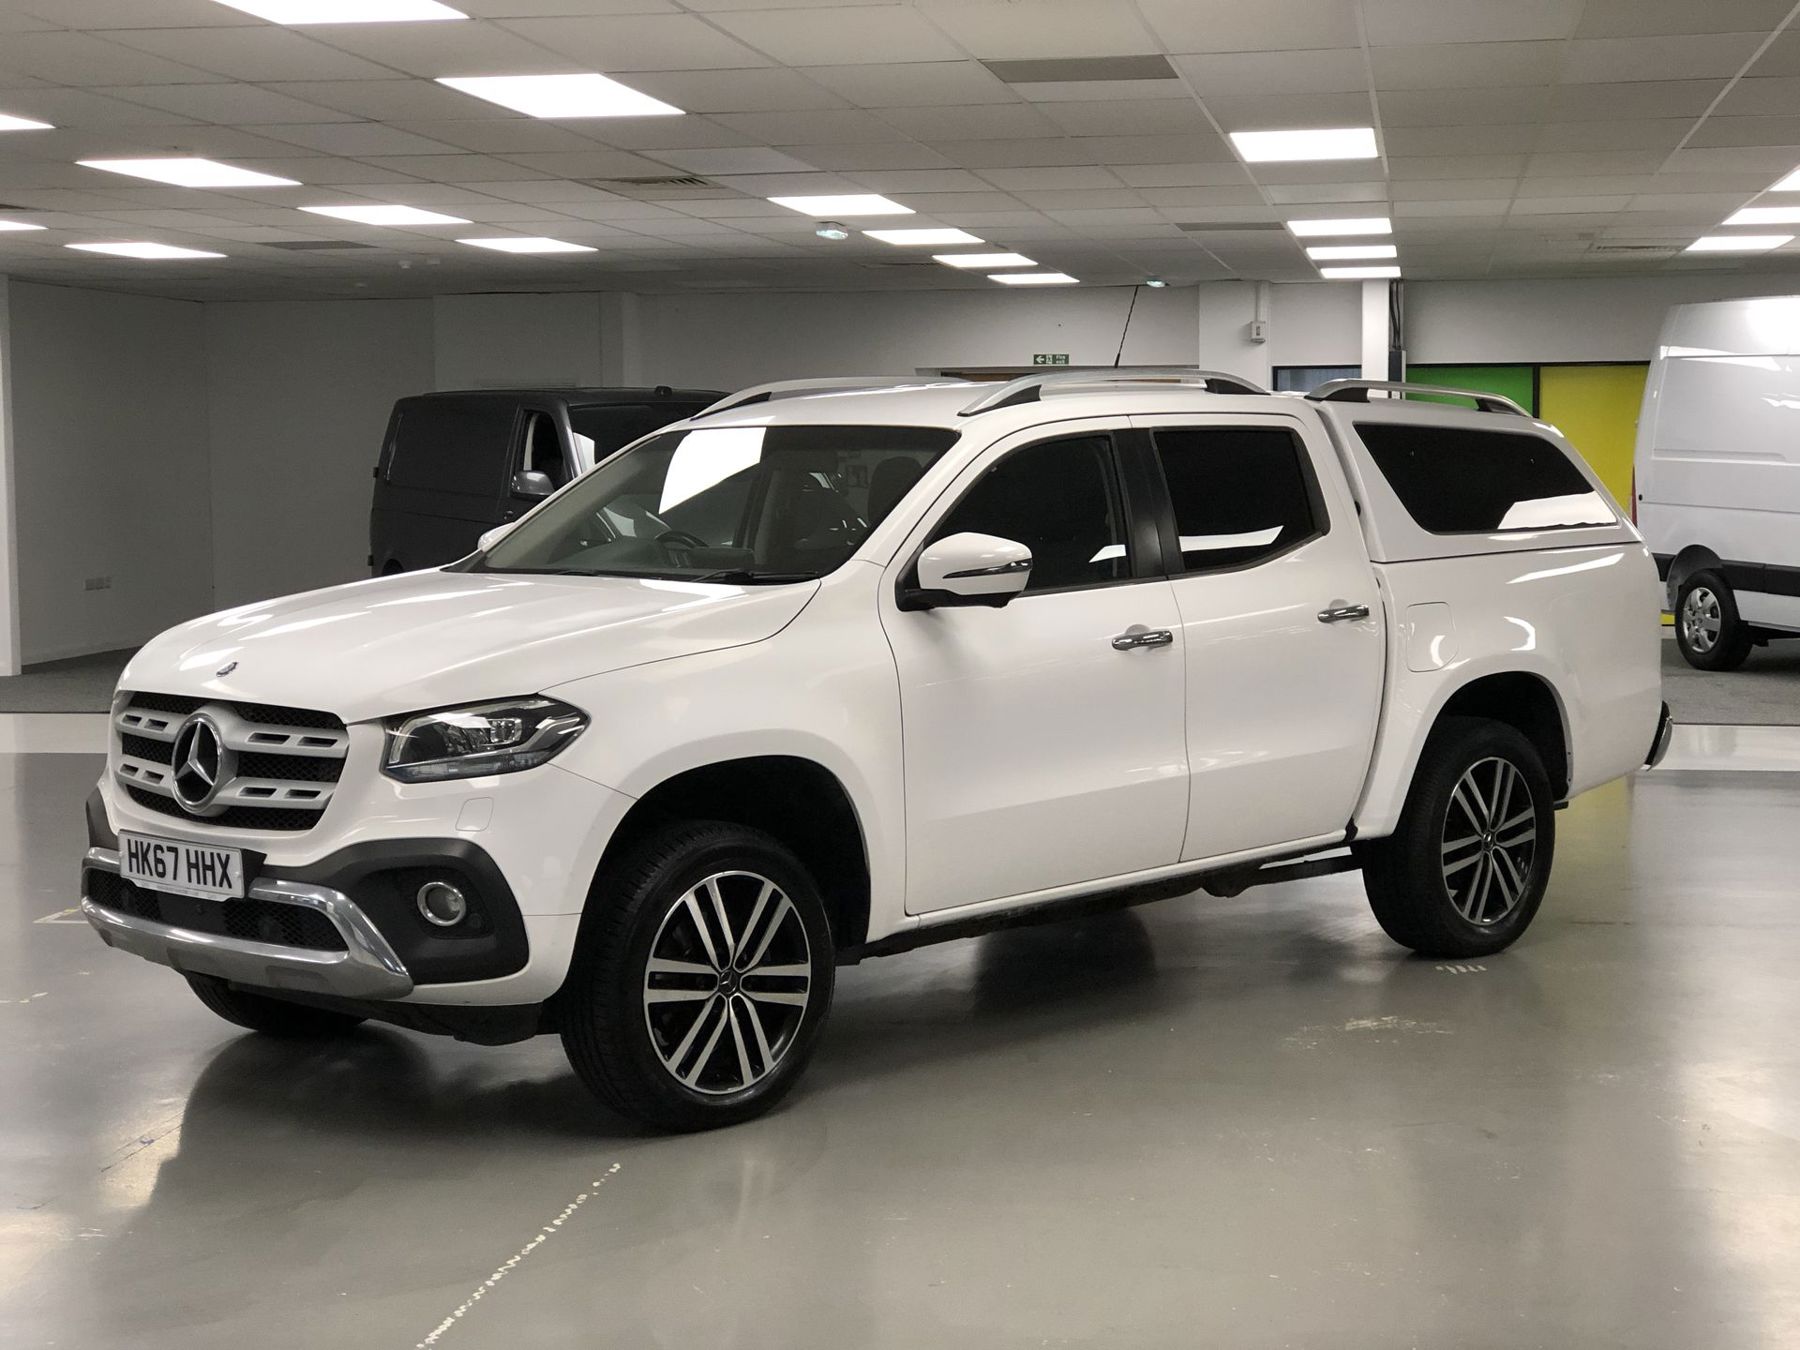 Unknown Manufacturer X Class Pickup 9